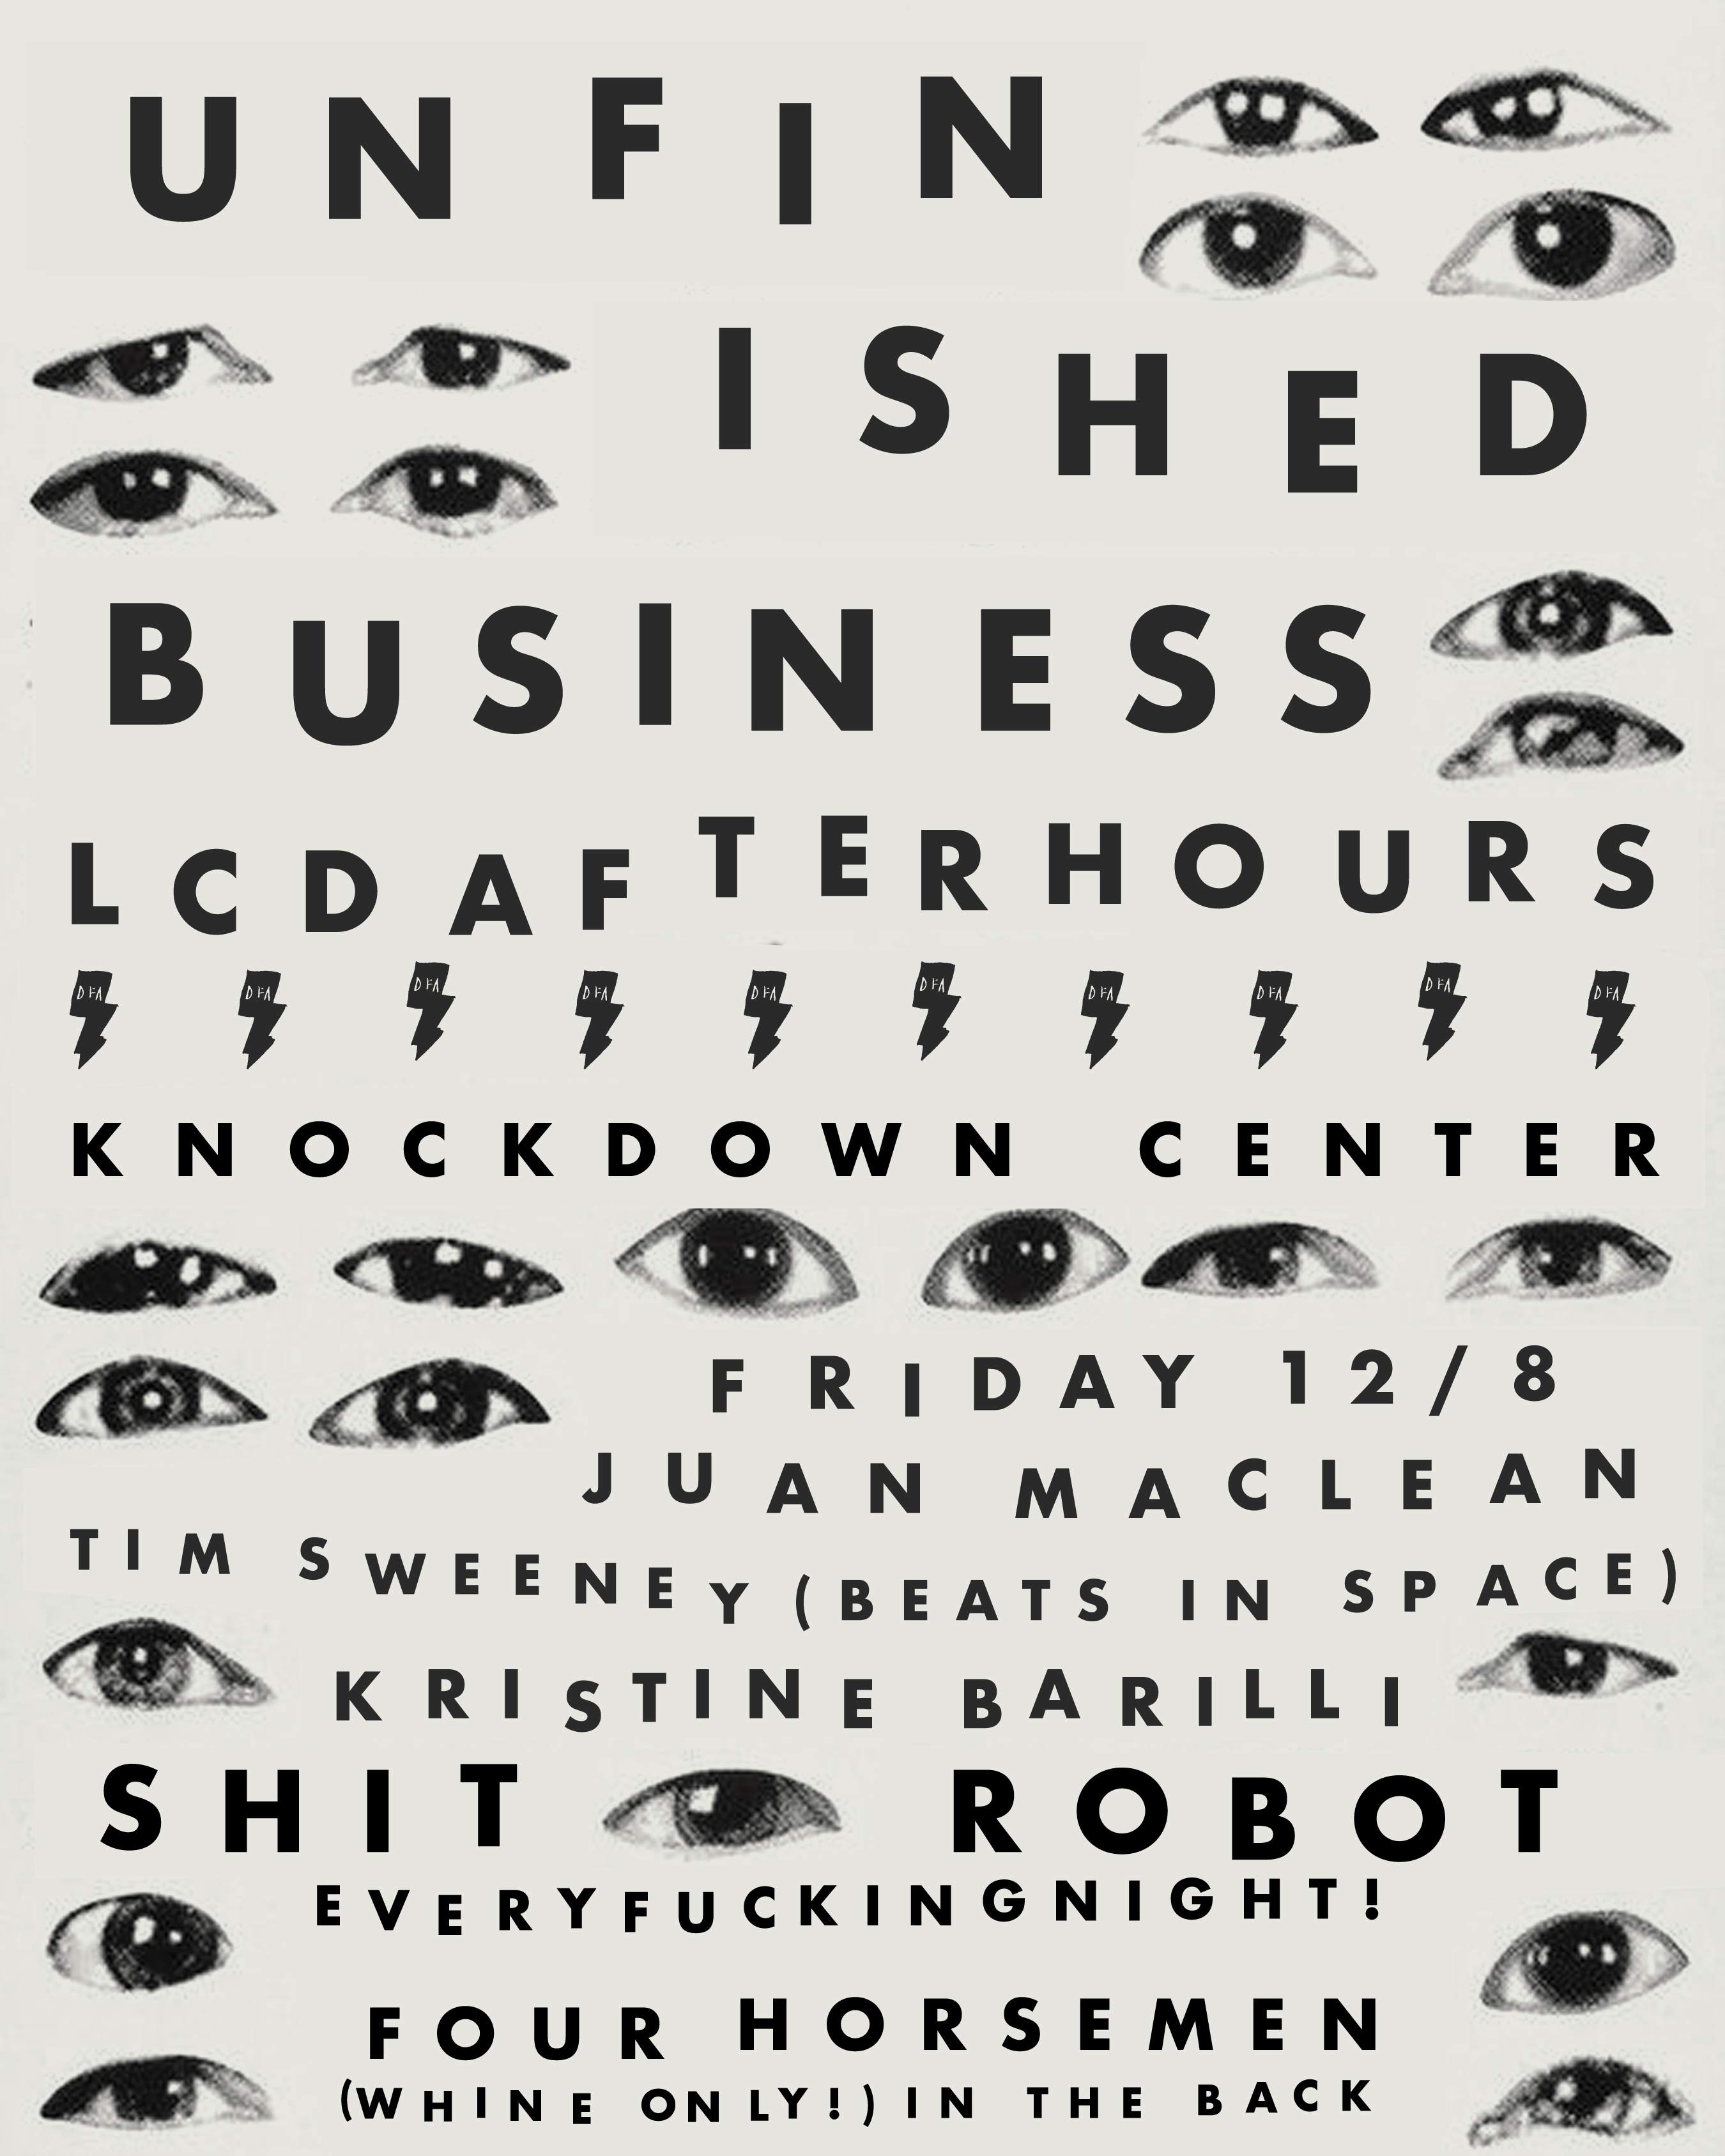 Unfinished Business: LCD After Hours - Página frontal